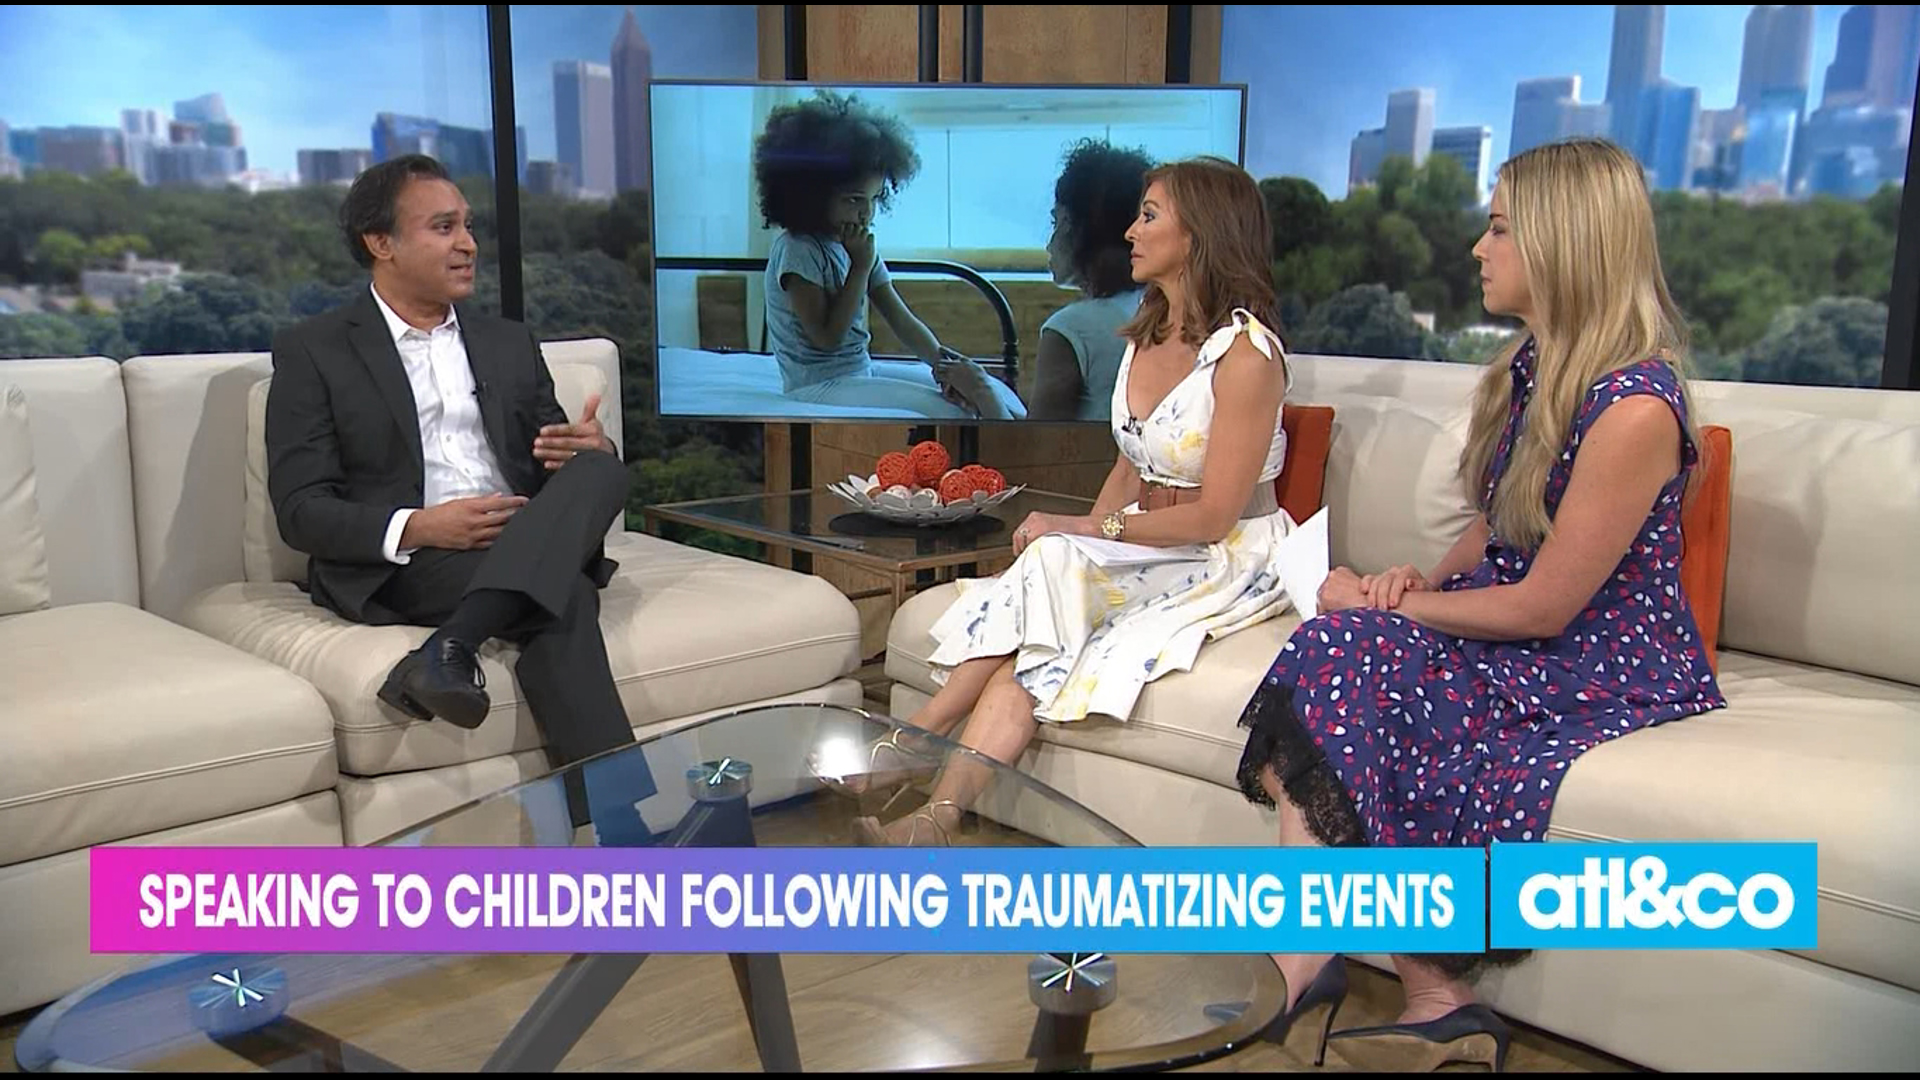 Psychiatrist and author Dr. B shares how to navigate tough conversations with our young kids, following traumatic events.